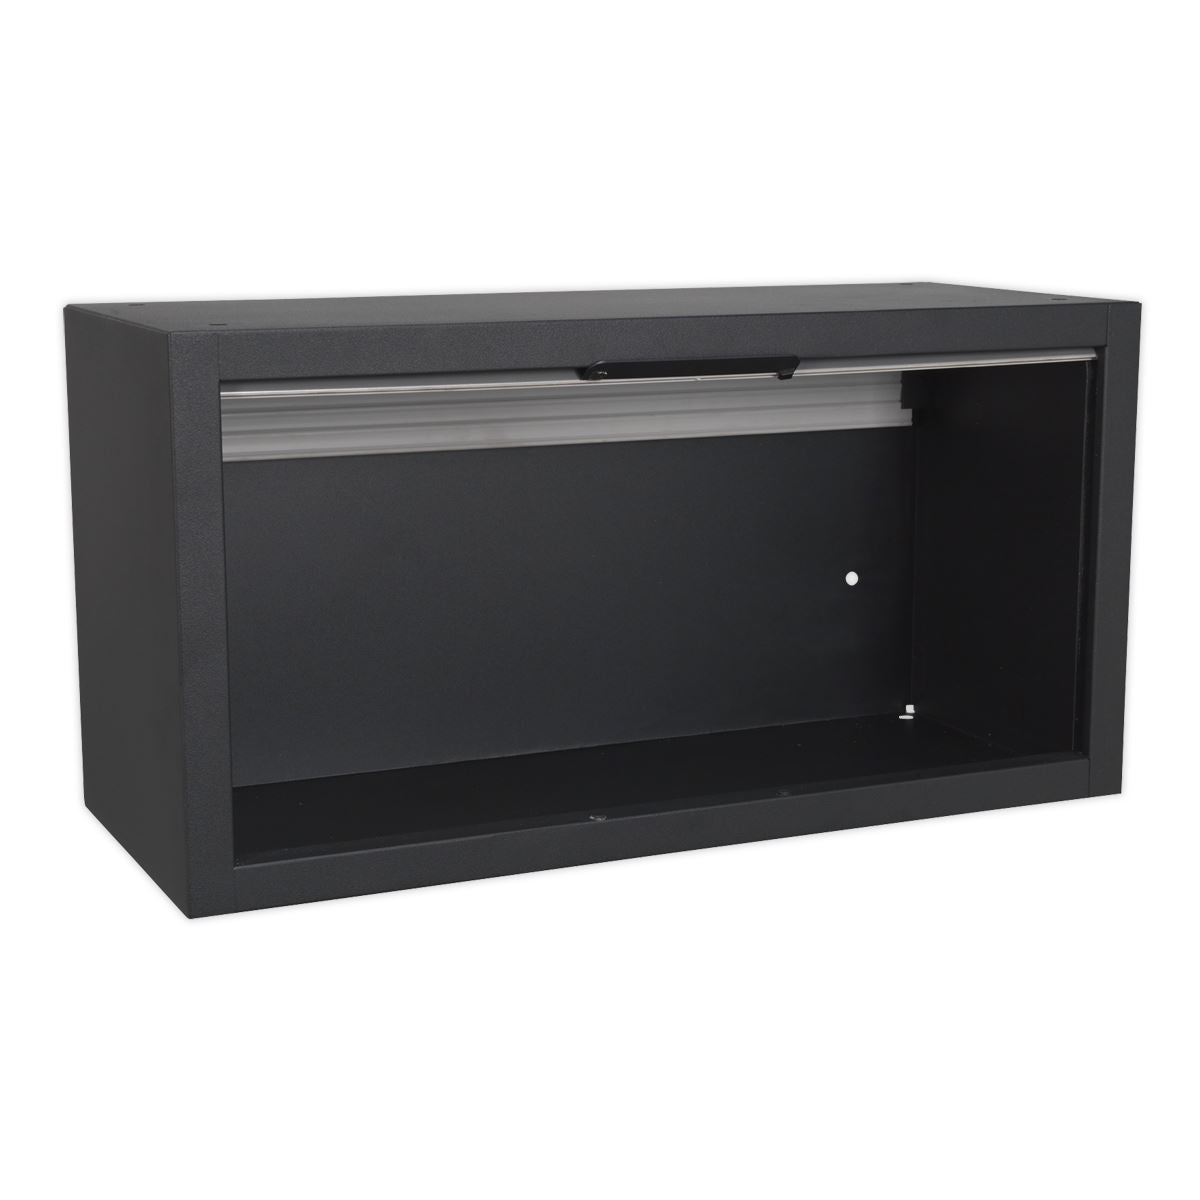 Sealey Superline Pro Modular Wall Cabinet Tambour Front 680mm